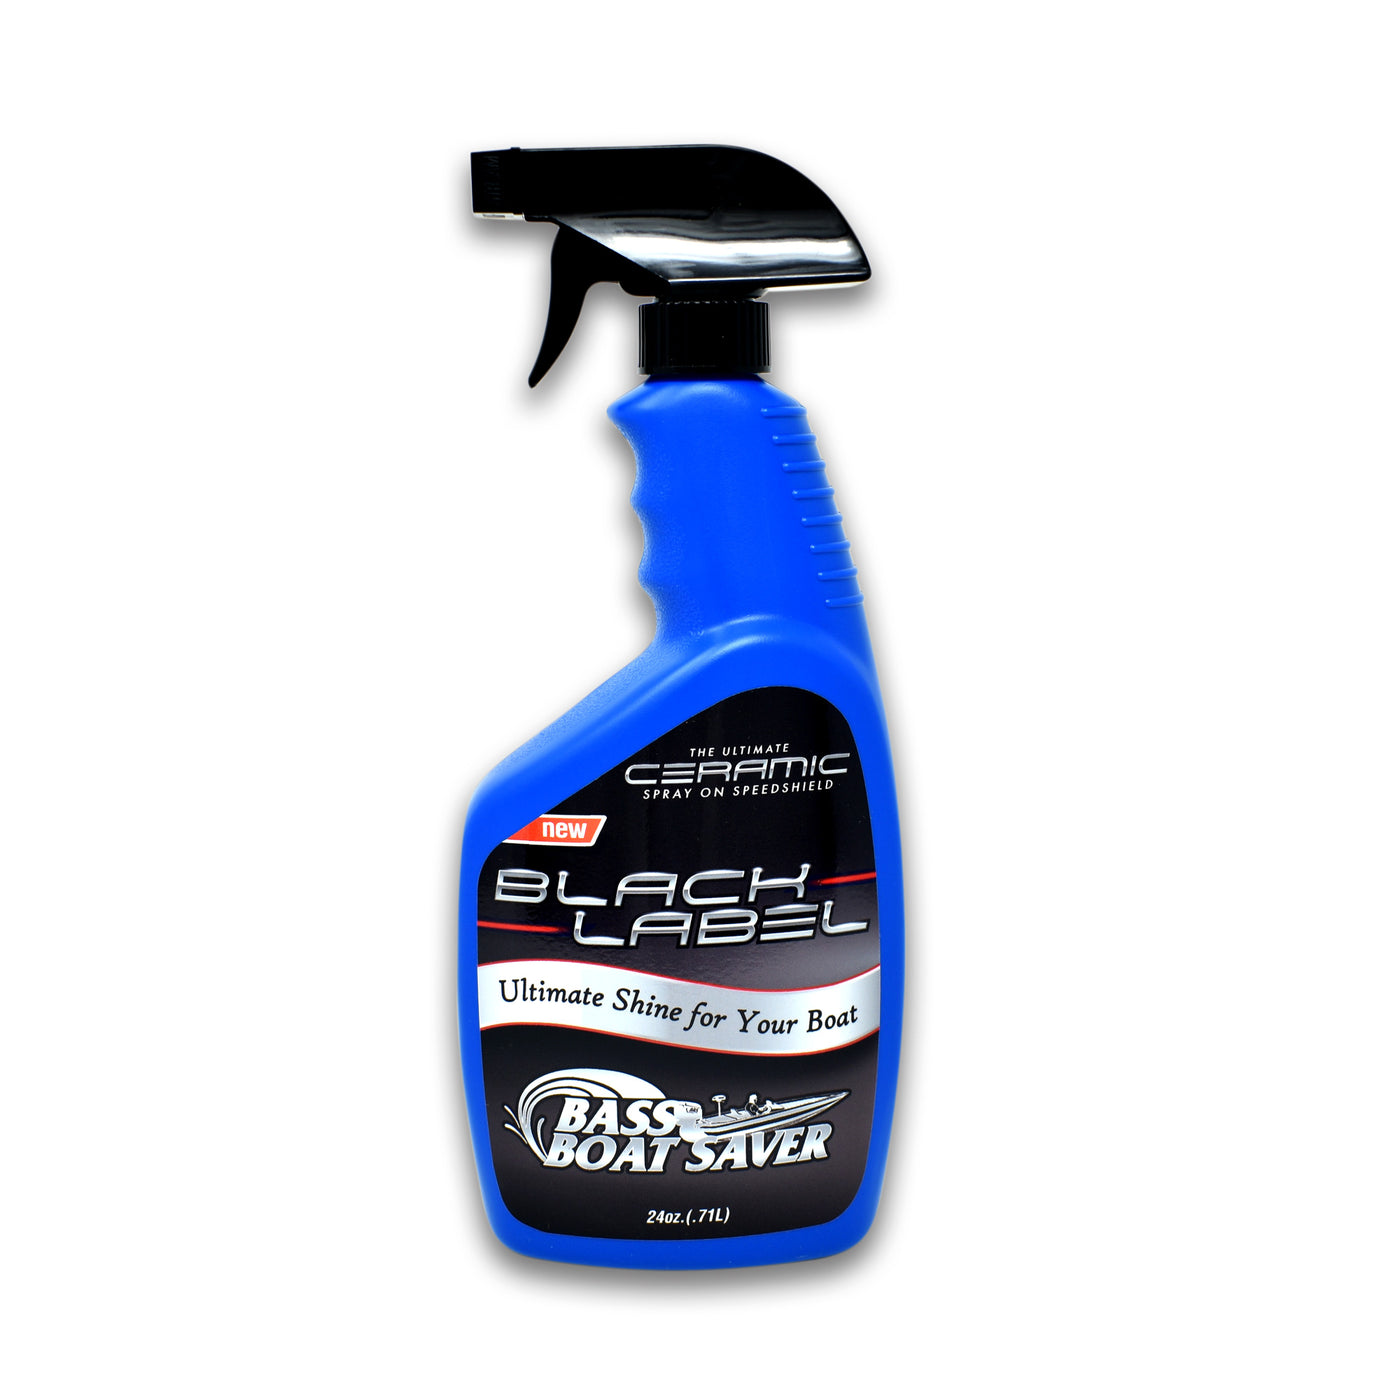  Bass Boat Saver Screen Cleaner - Rapid Hard Water